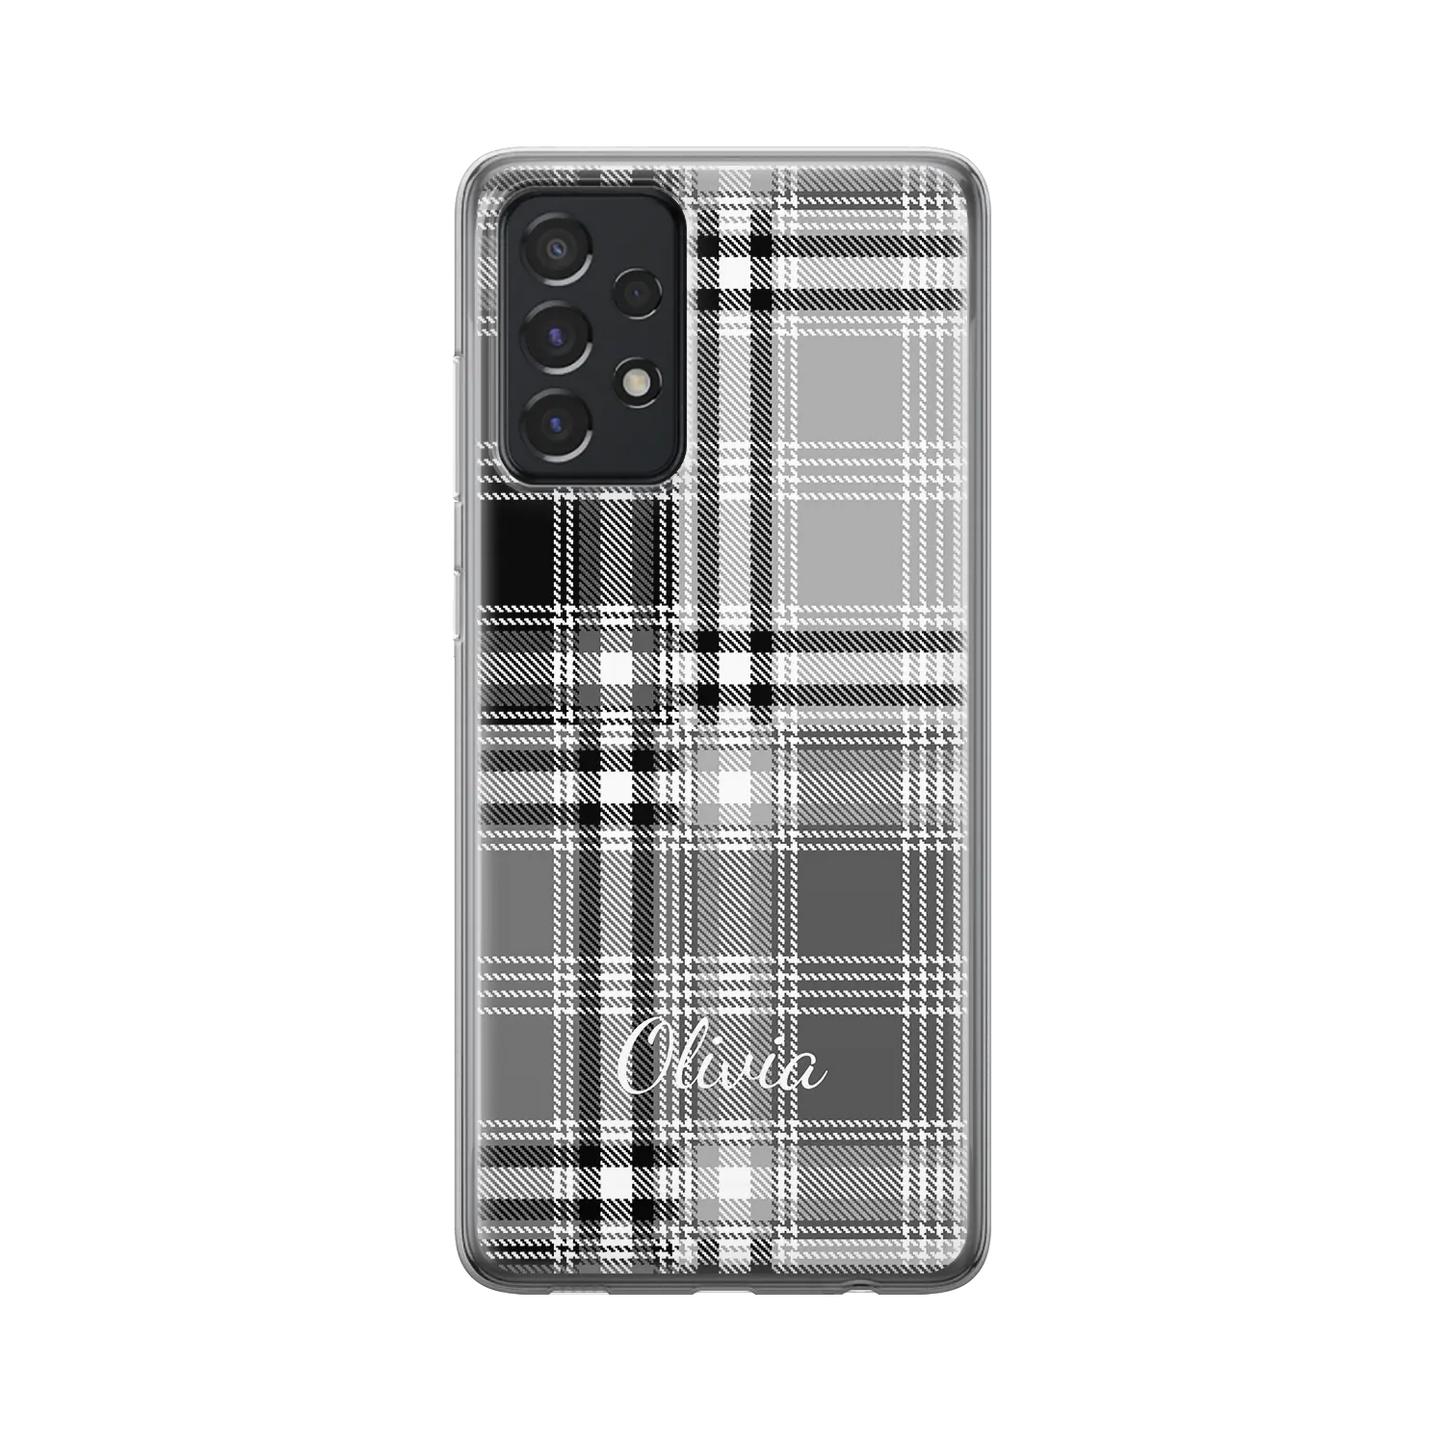 Plaid & Simple - Personalised Galaxy A Case